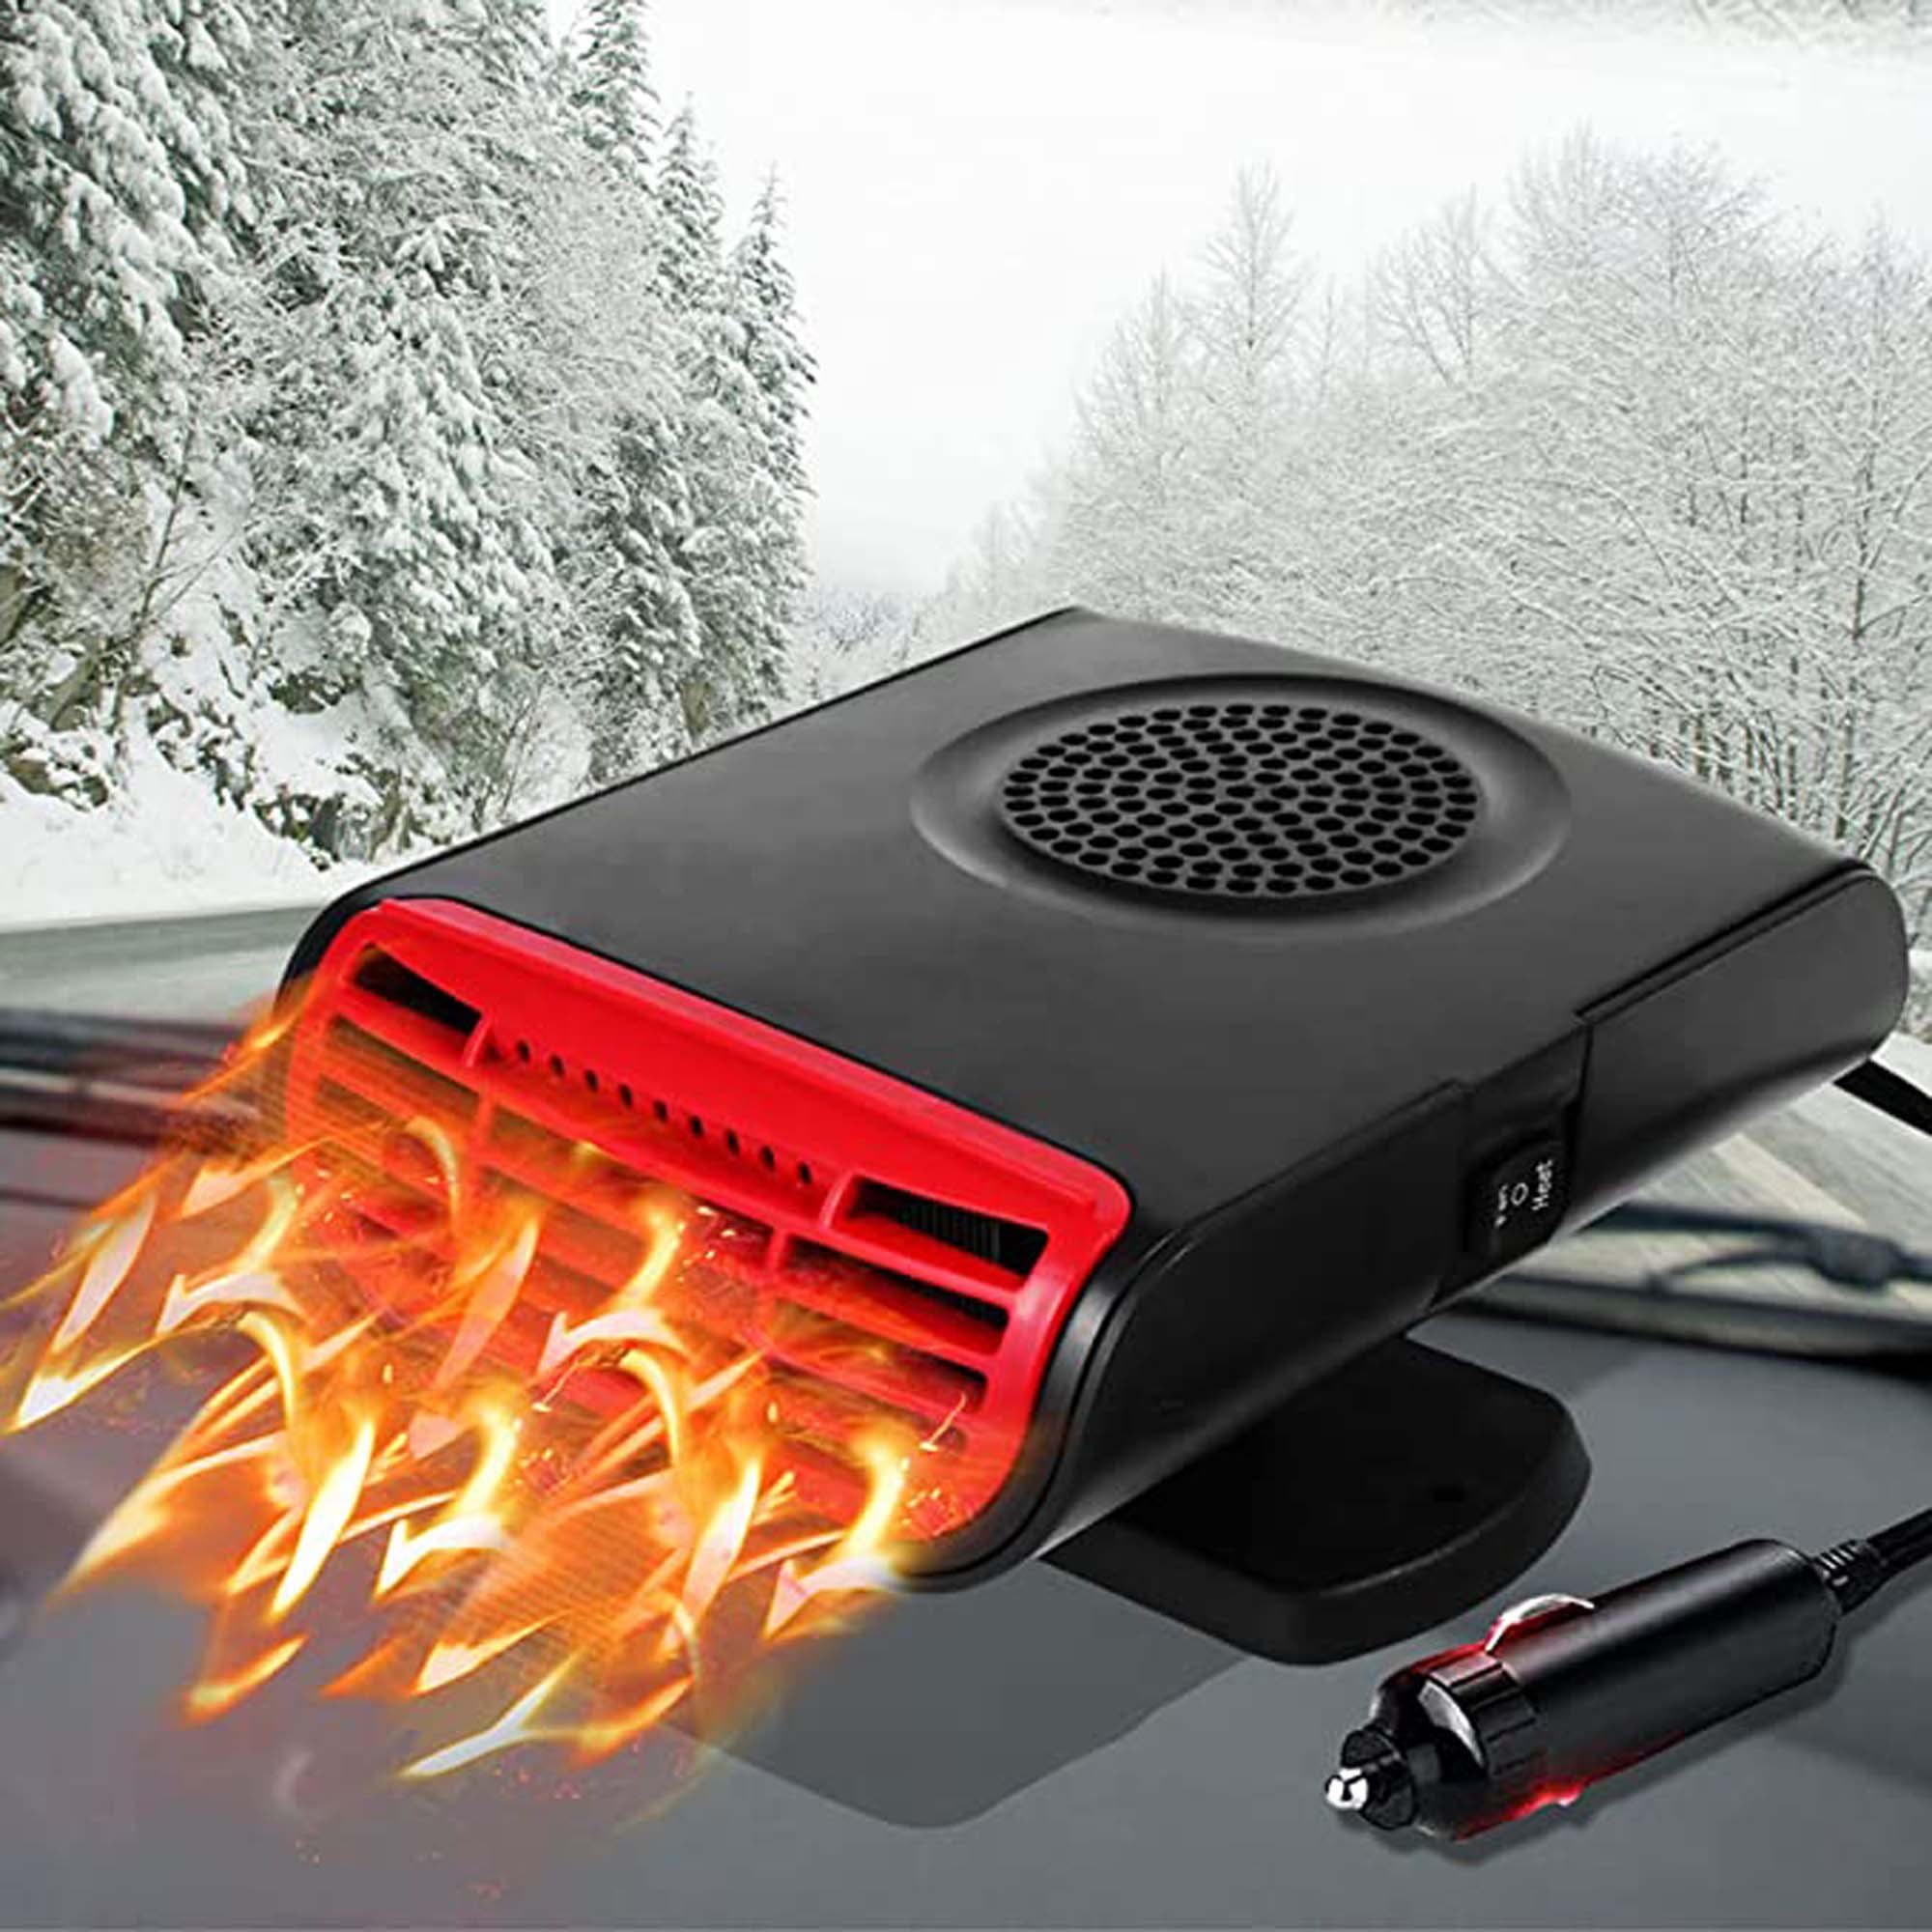 12V Car Heater and Window Defroster- Black